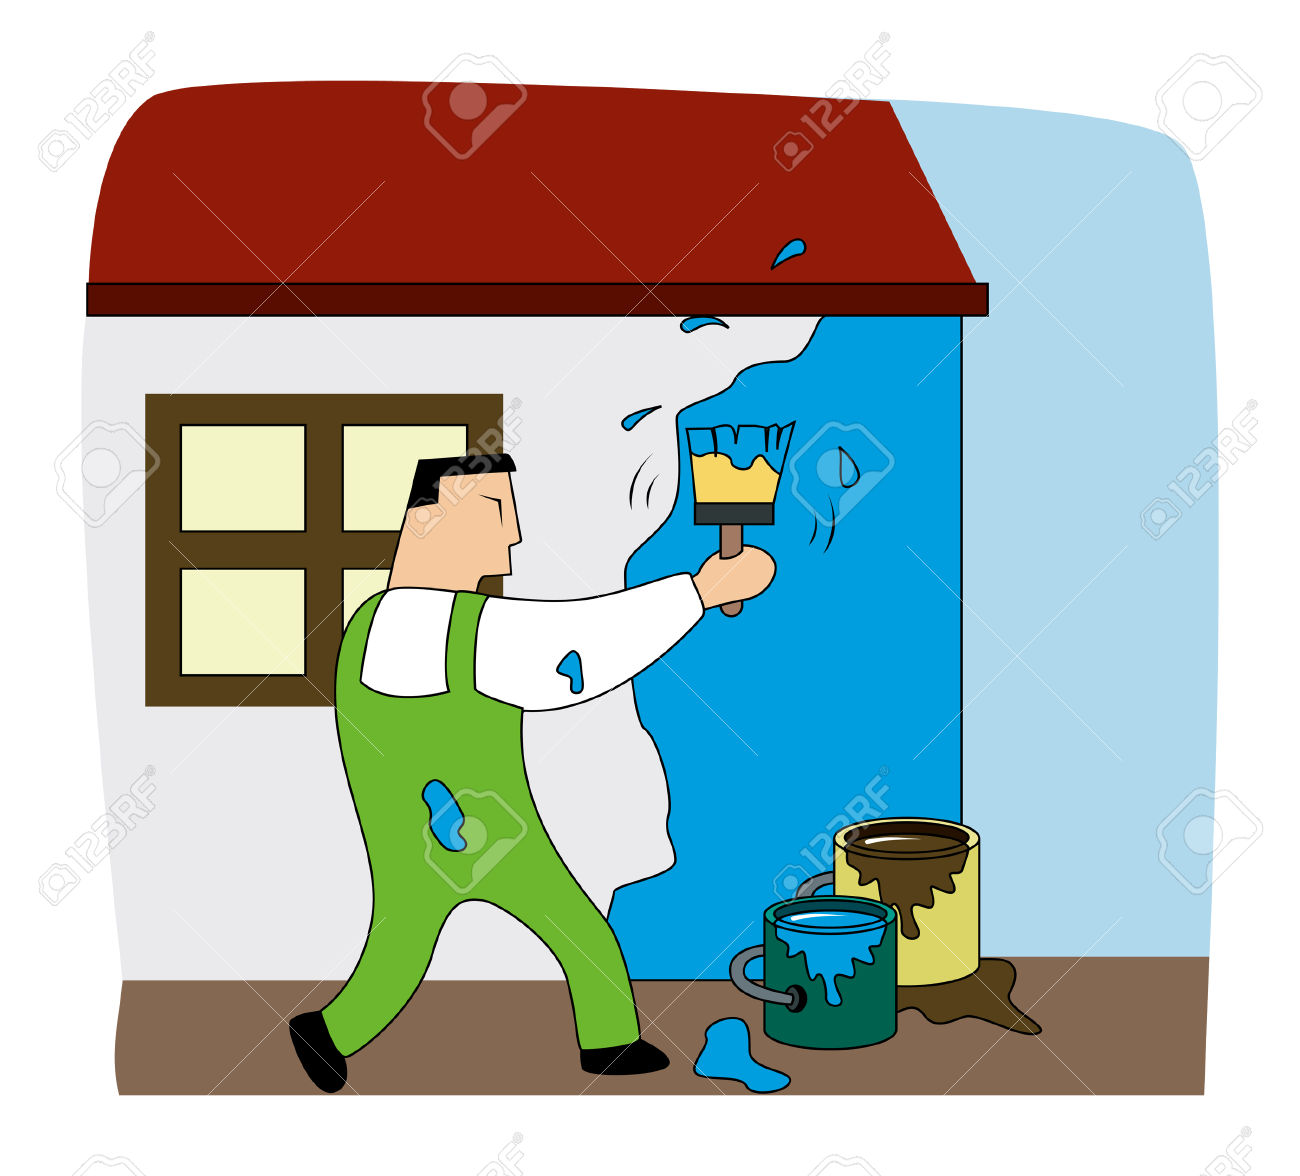 Painting a house clipart.